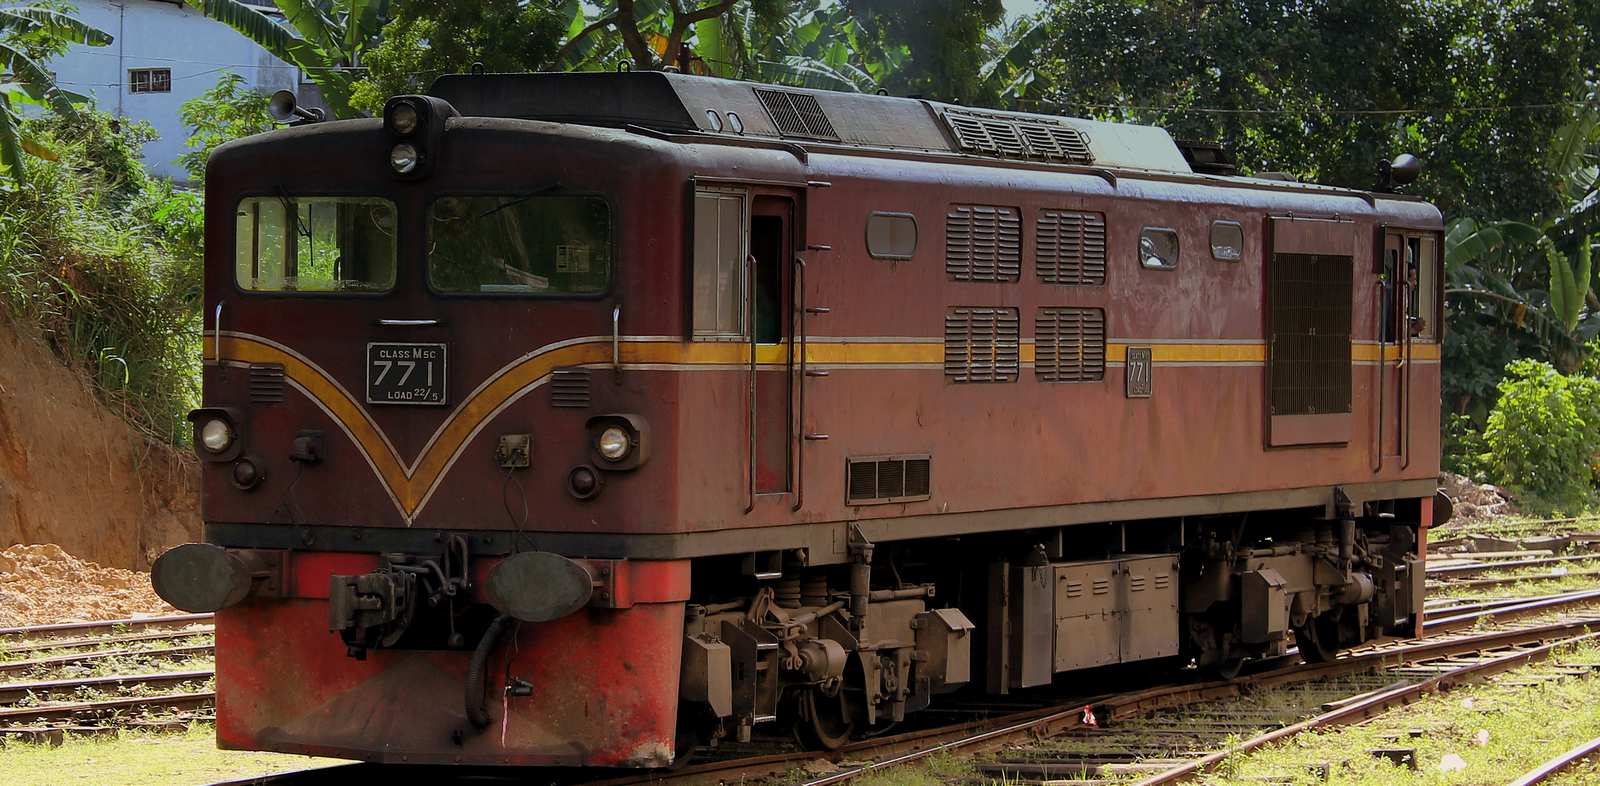 M5C No. 771 in January 2013 at Atkandy